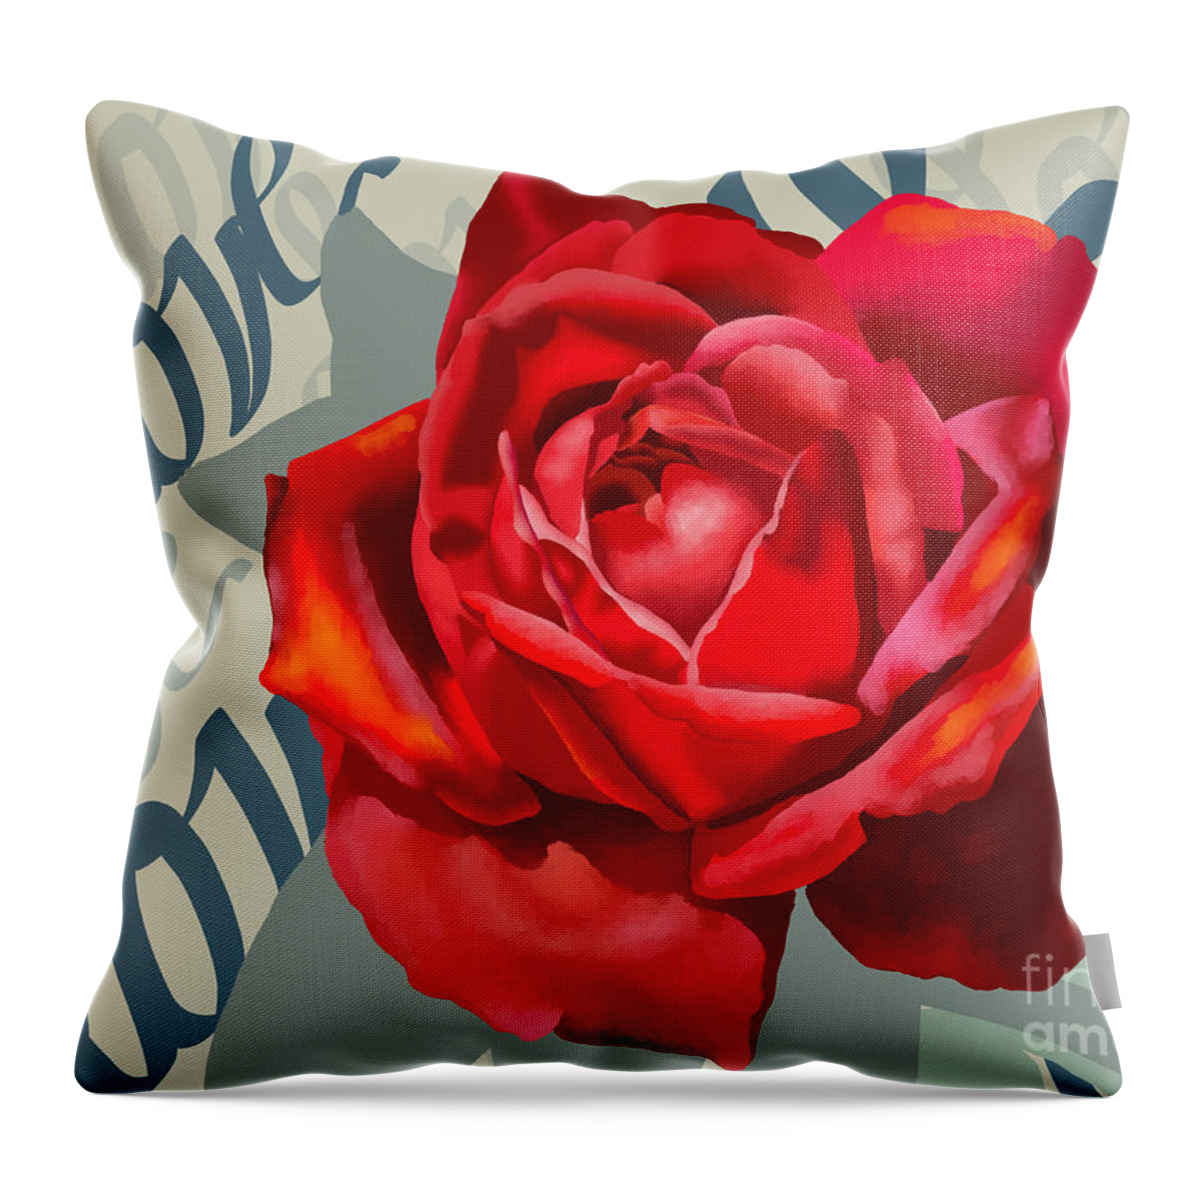 Rose Throw Pillow featuring the digital art Love by Yenni Harrison